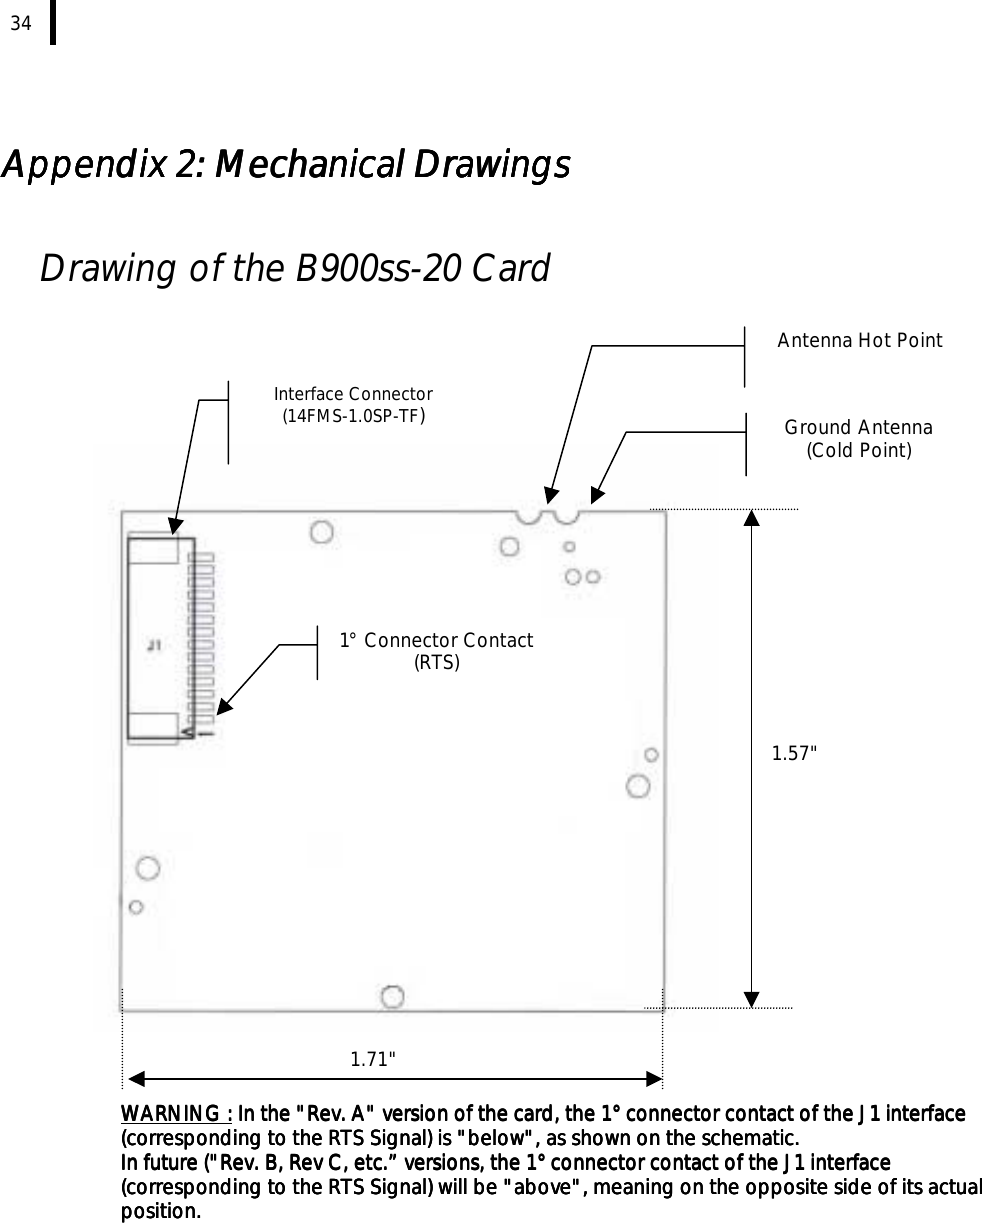  34   Appendix 2: Mechanical DrawingsAppendix 2: Mechanical DrawingsAppendix 2: Mechanical DrawingsAppendix 2: Mechanical Drawings     Drawing of the B900ss-20 Card          WARNING :WARNING :WARNING :WARNING : In the &quot;Rev. A&quot; version of the card, the 1° connector contact of the J1 interface  In the &quot;Rev. A&quot; version of the card, the 1° connector contact of the J1 interface  In the &quot;Rev. A&quot; version of the card, the 1° connector contact of the J1 interface  In the &quot;Rev. A&quot; version of the card, the 1° connector contact of the J1 interface (corresponding to the RTS Signal) is &quot;below&quot;, as shown on the schematic. (corresponding to the RTS Signal) is &quot;below&quot;, as shown on the schematic. (corresponding to the RTS Signal) is &quot;below&quot;, as shown on the schematic. (corresponding to the RTS Signal) is &quot;below&quot;, as shown on the schematic.     In future (&quot;Rev. B, Rev C, etc.” versions, the 1° connector contact of the J1 interface In future (&quot;Rev. B, Rev C, etc.” versions, the 1° connector contact of the J1 interface In future (&quot;Rev. B, Rev C, etc.” versions, the 1° connector contact of the J1 interface In future (&quot;Rev. B, Rev C, etc.” versions, the 1° connector contact of the J1 interface (corresponding to the RTS Signal) will be &quot;above&quot;, meaning on the opposite side of its actual (corresponding to the RTS Signal) will be &quot;above&quot;, meaning on the opposite side of its actual (corresponding to the RTS Signal) will be &quot;above&quot;, meaning on the opposite side of its actual (corresponding to the RTS Signal) will be &quot;above&quot;, meaning on the opposite side of its actual position.position.position.position. 1.71&quot; 1.57&quot; Interface Connector (14FMS-1.0SP-TF)  Ground Antenna (Cold Point) Antenna Hot Point 1° Connector Contact (RTS) 